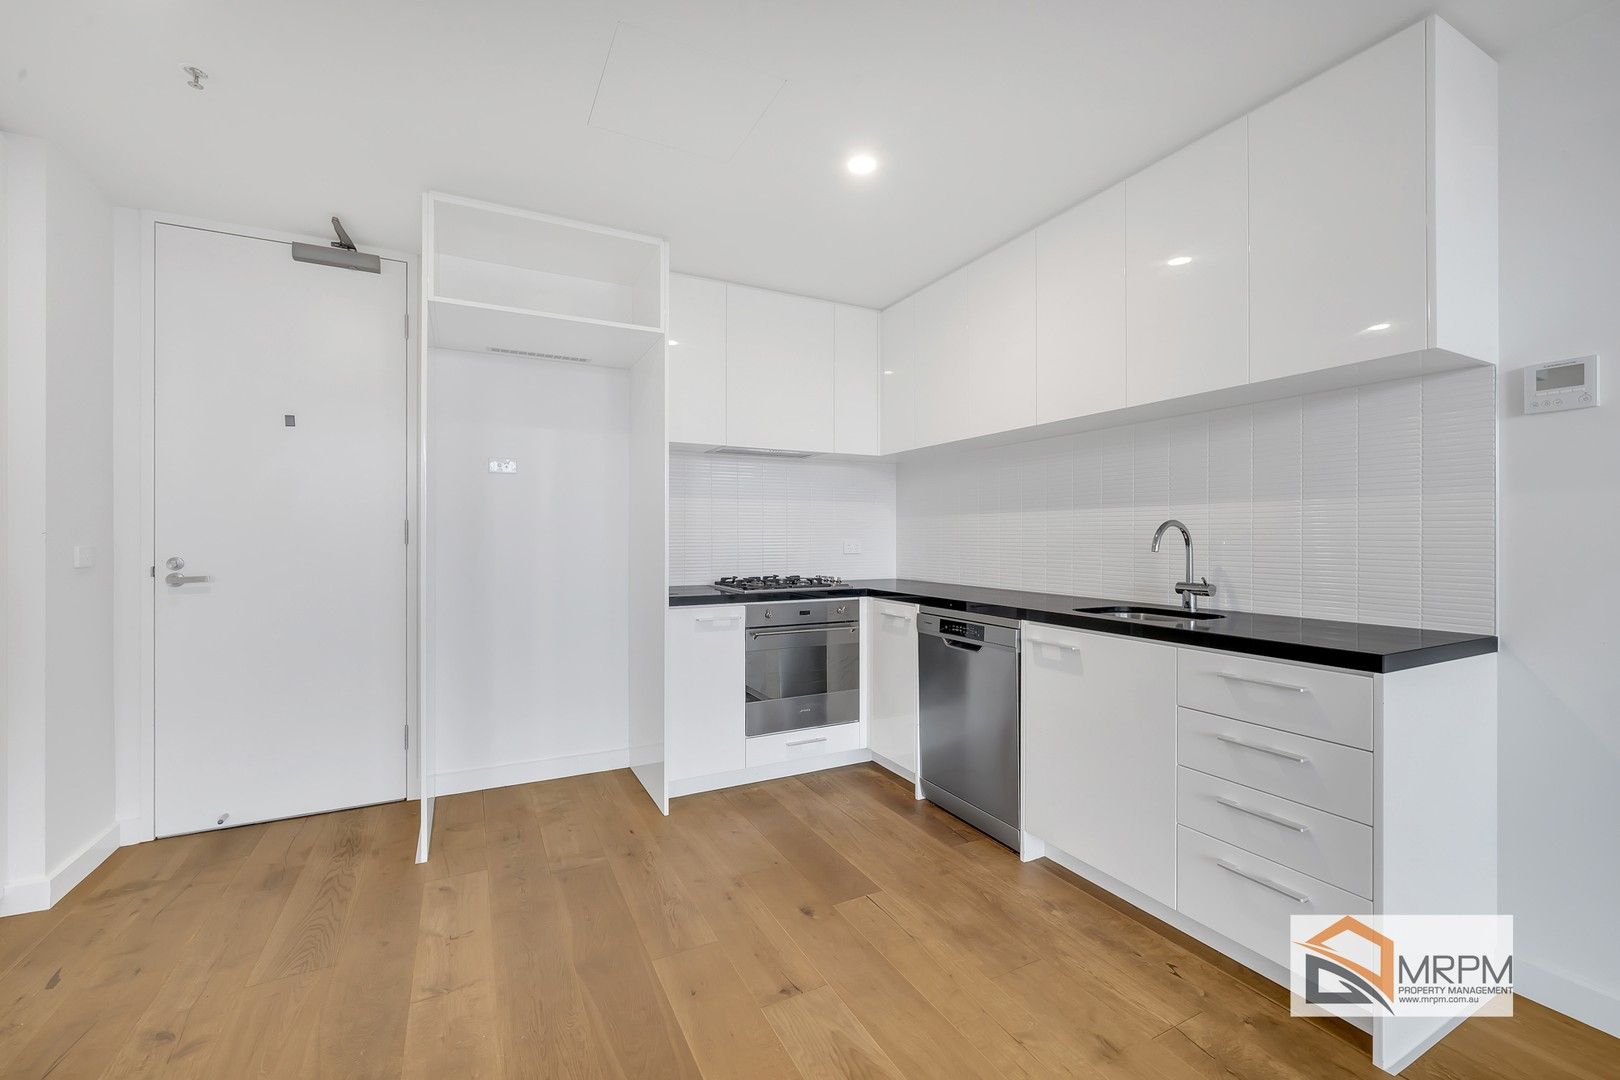 1 bedrooms Apartment / Unit / Flat in 221/2 Gillies Street ESSENDON NORTH VIC, 3041